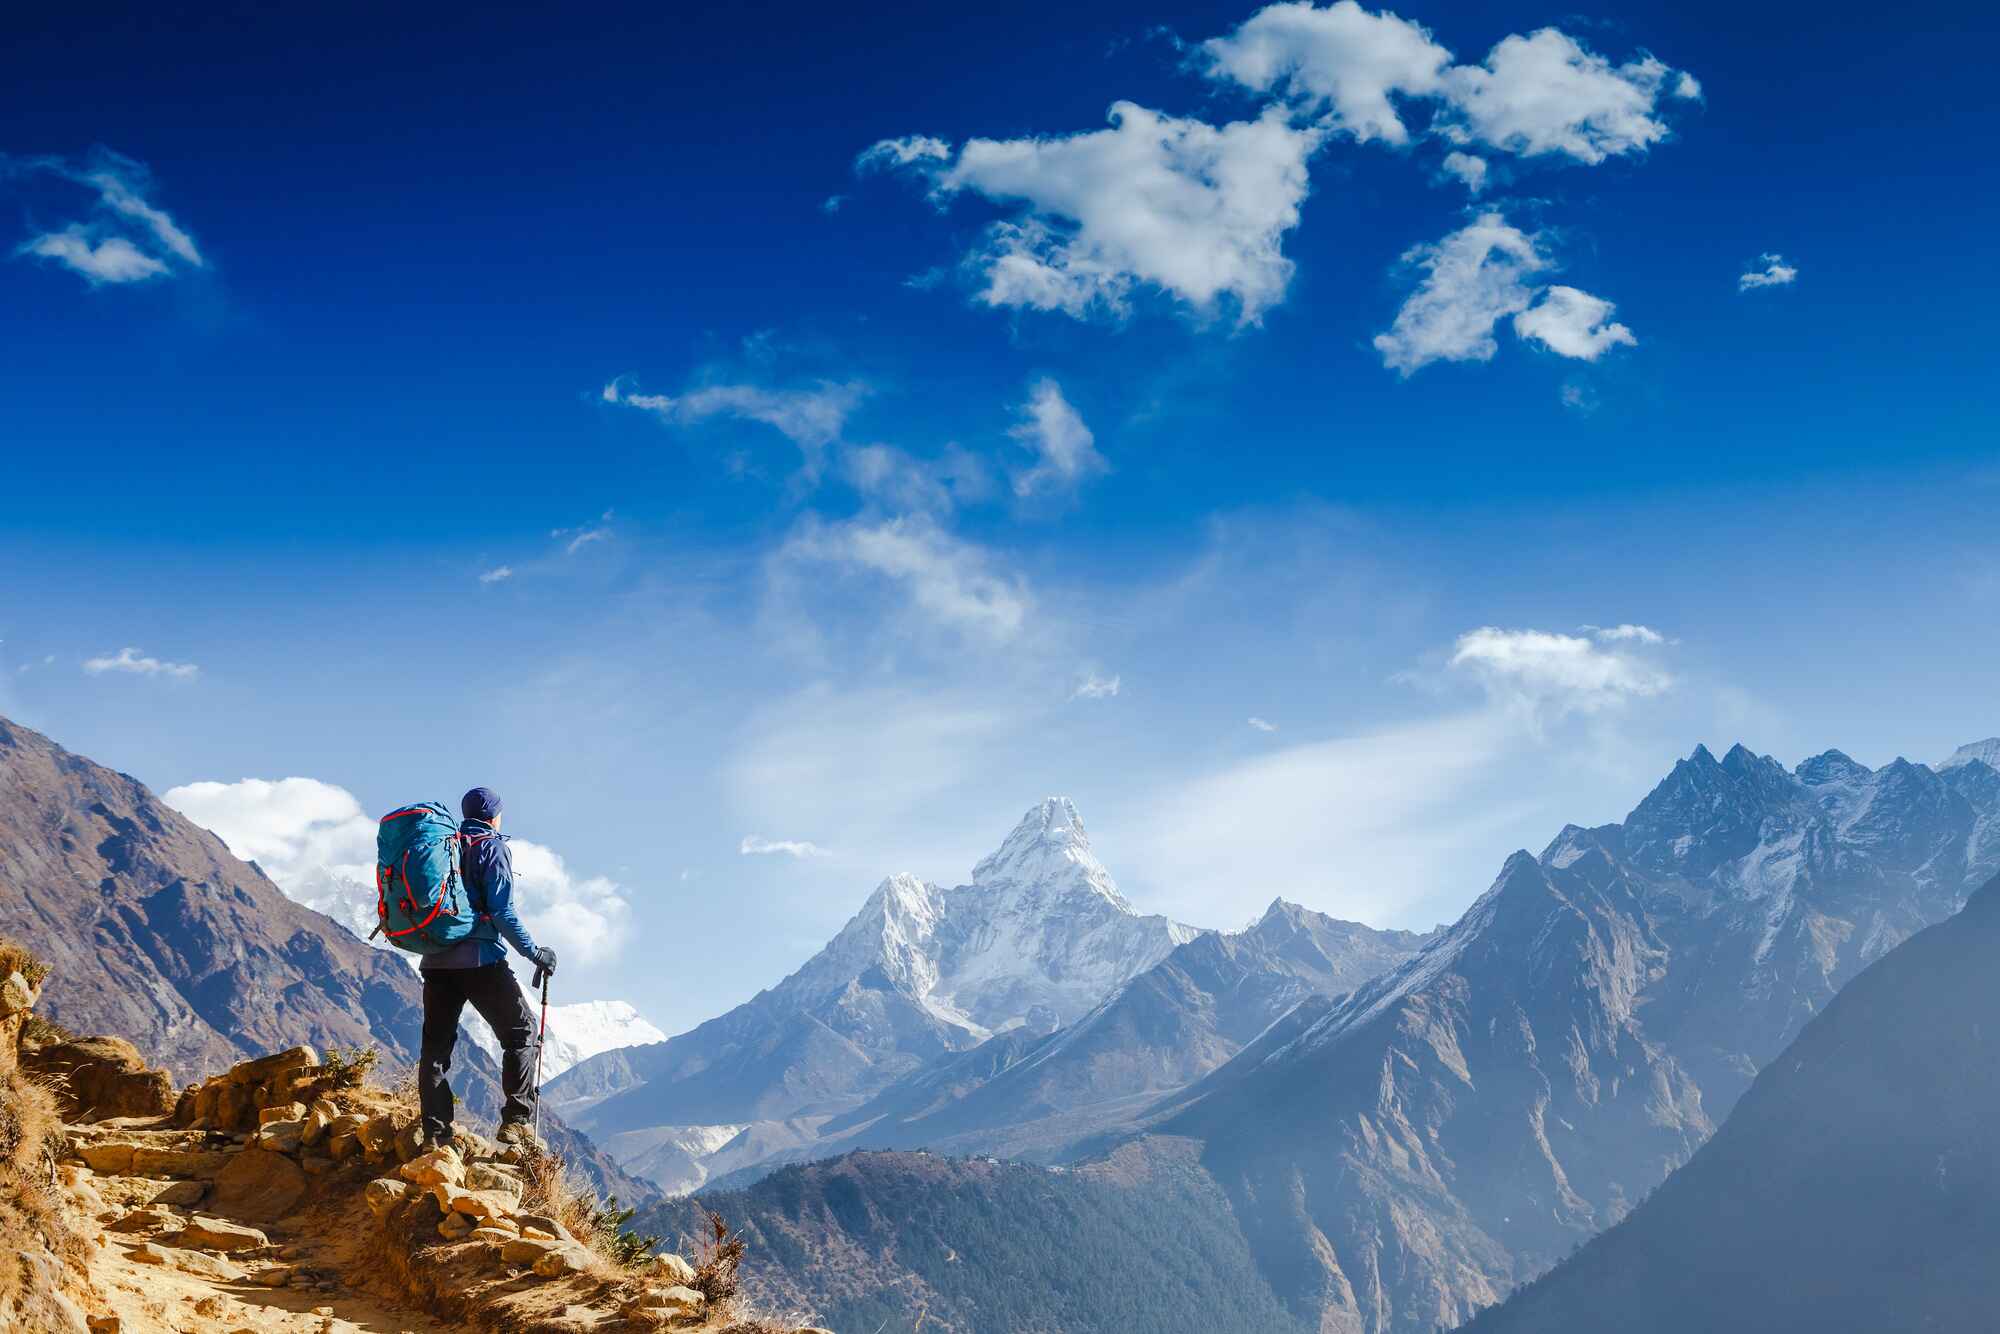 Image of a hiker standing on the side of a mountain looking towards some mountain peaks in the distance